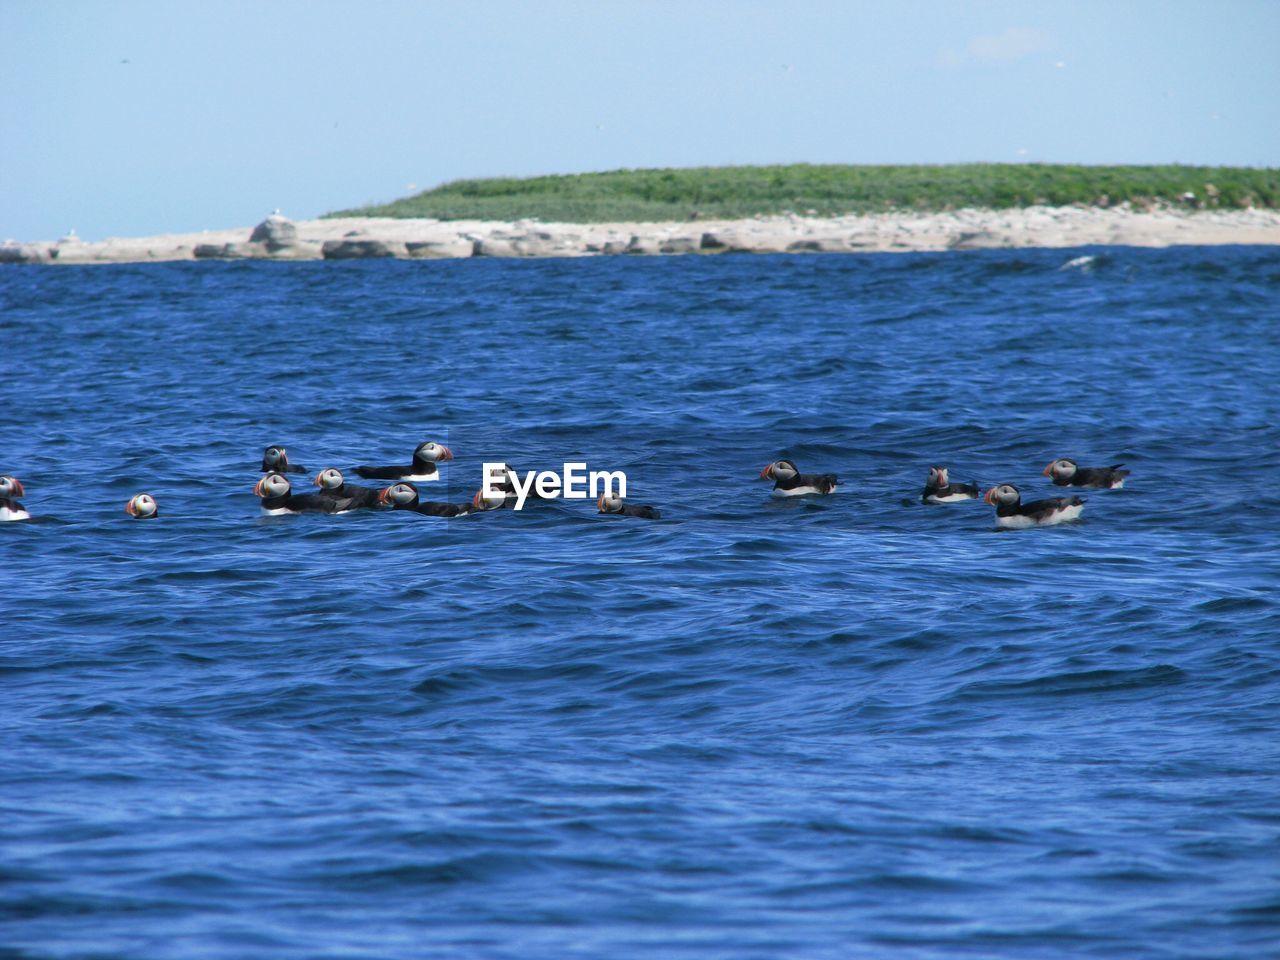 Puffins swimming on sea